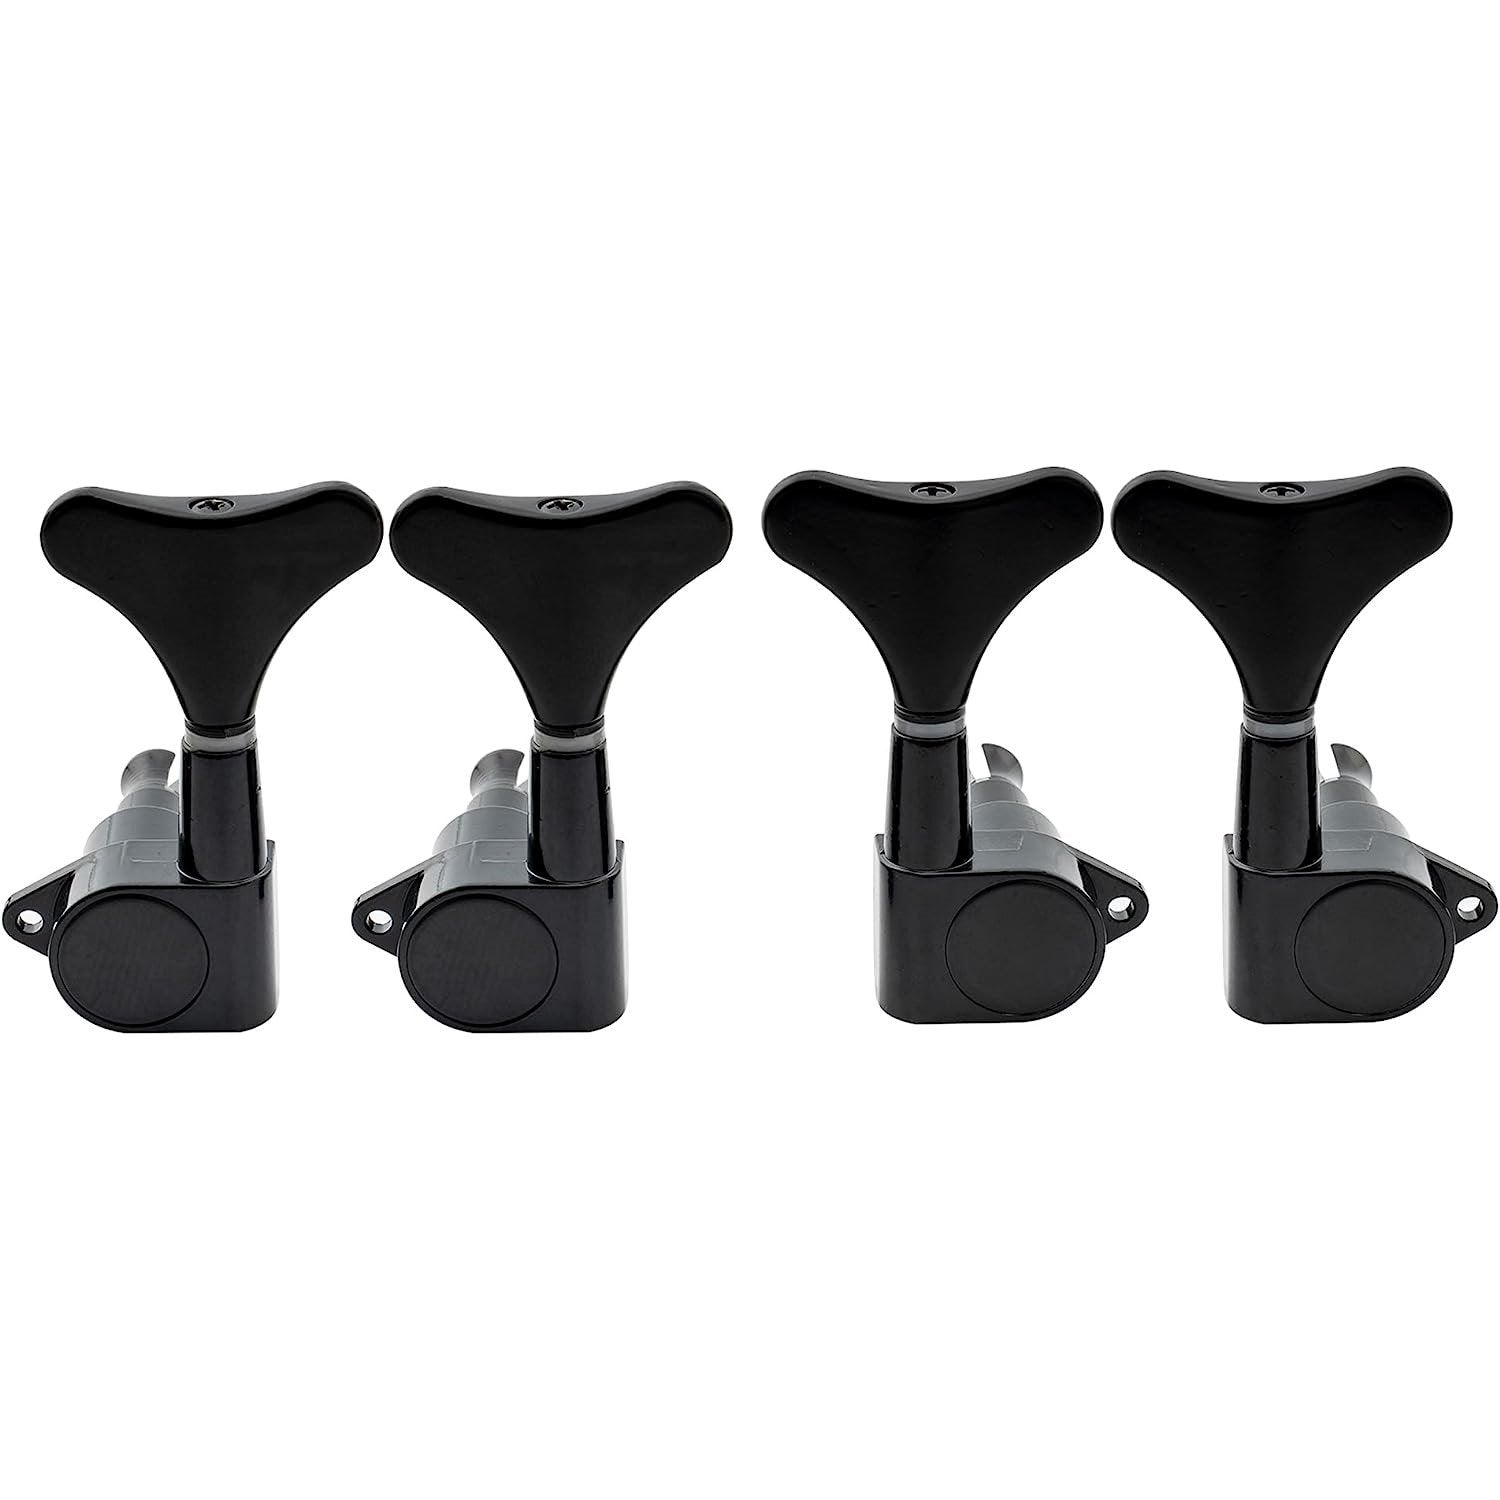 2x2 Sealed Bass Tuning Pegs, Black